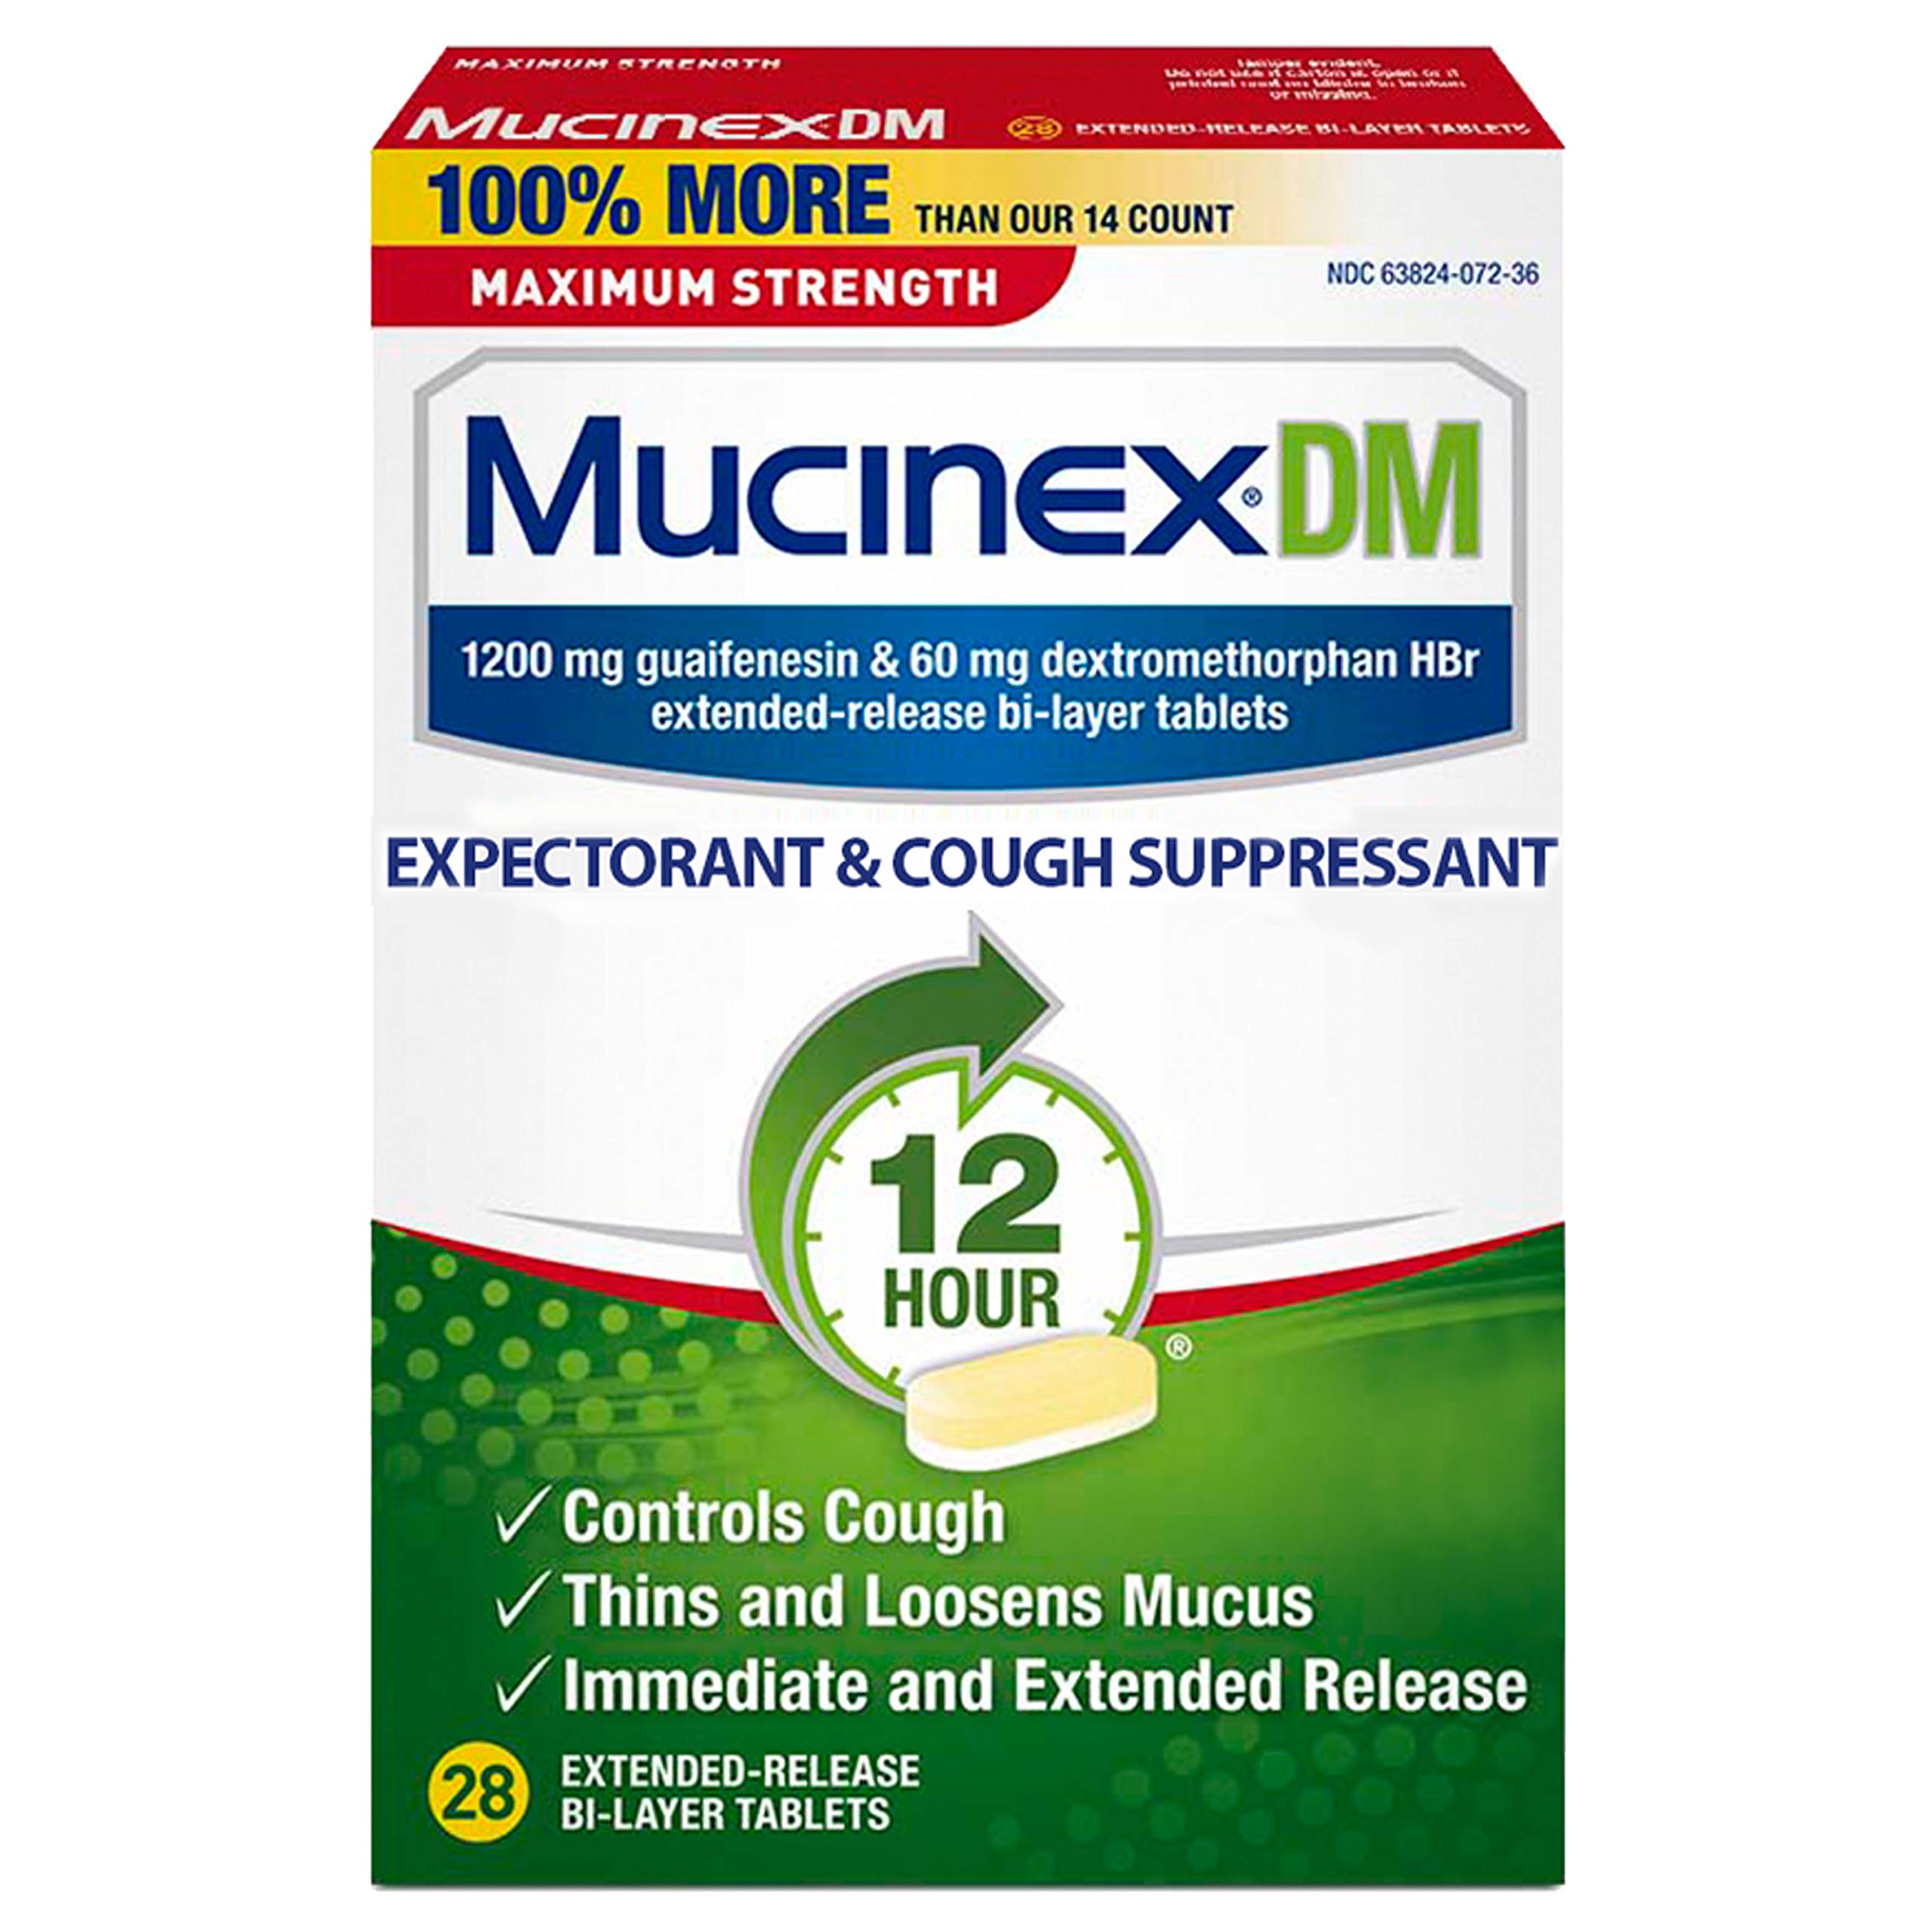 Cough Suppressant and Expectorant, Mucinex DM Maximum Strength 12 Hour Tablets, 28ct, 1200 mg Guaifenesin, Relieves Chest Congestion, Quiets Wet and Dry Cough, #1 Doctor Recommended OTC expectorant